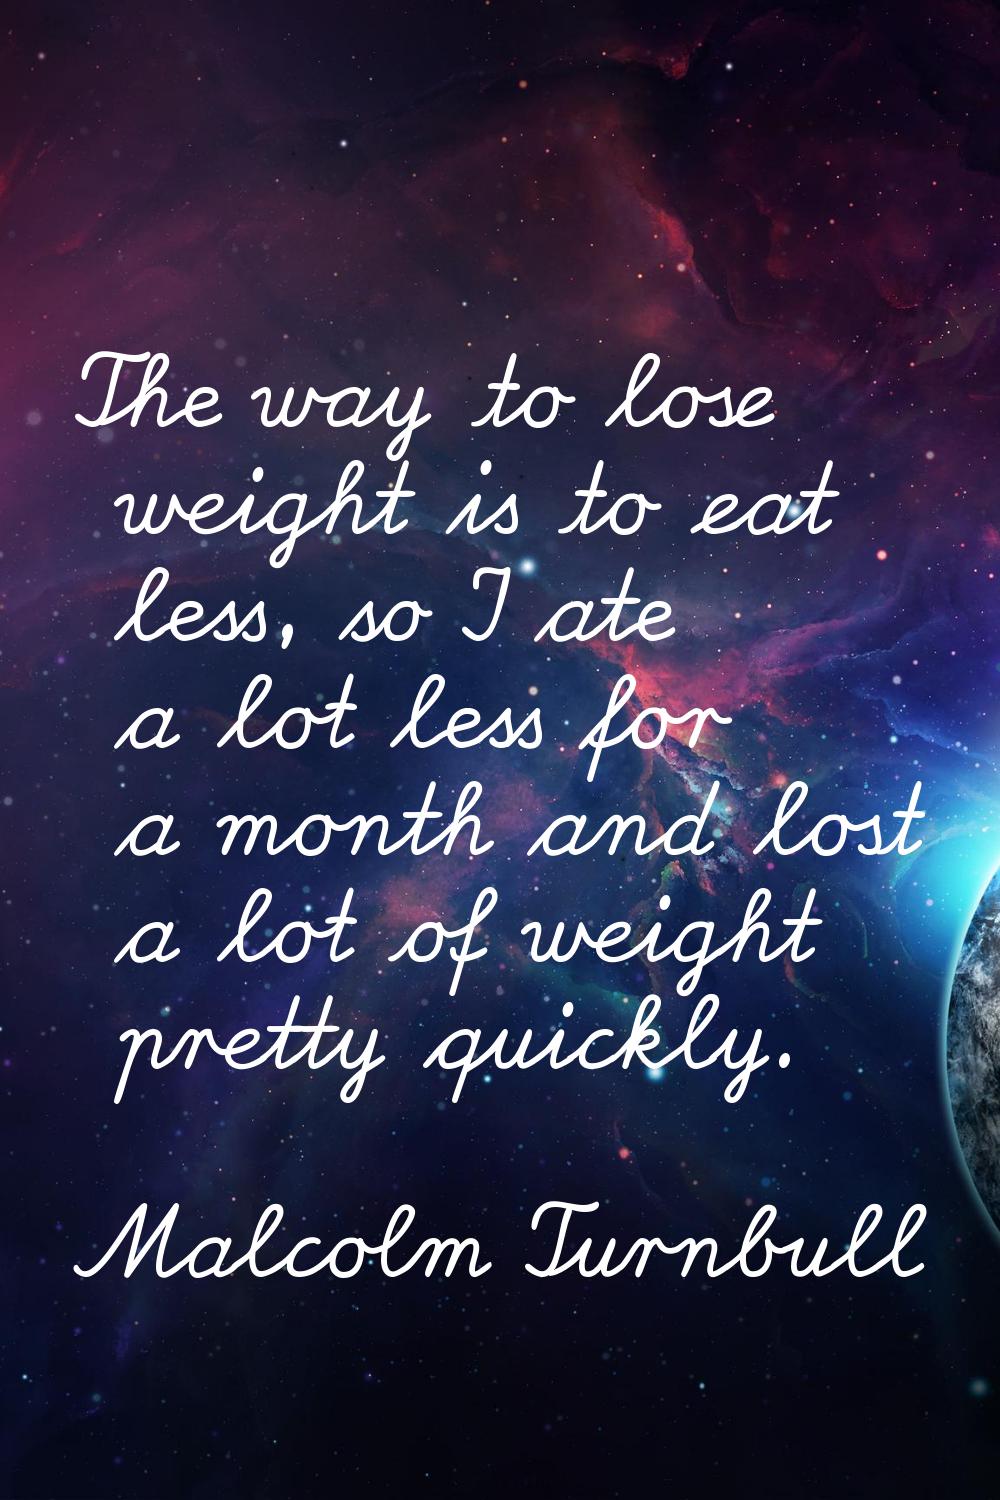 The way to lose weight is to eat less, so I ate a lot less for a month and lost a lot of weight pre